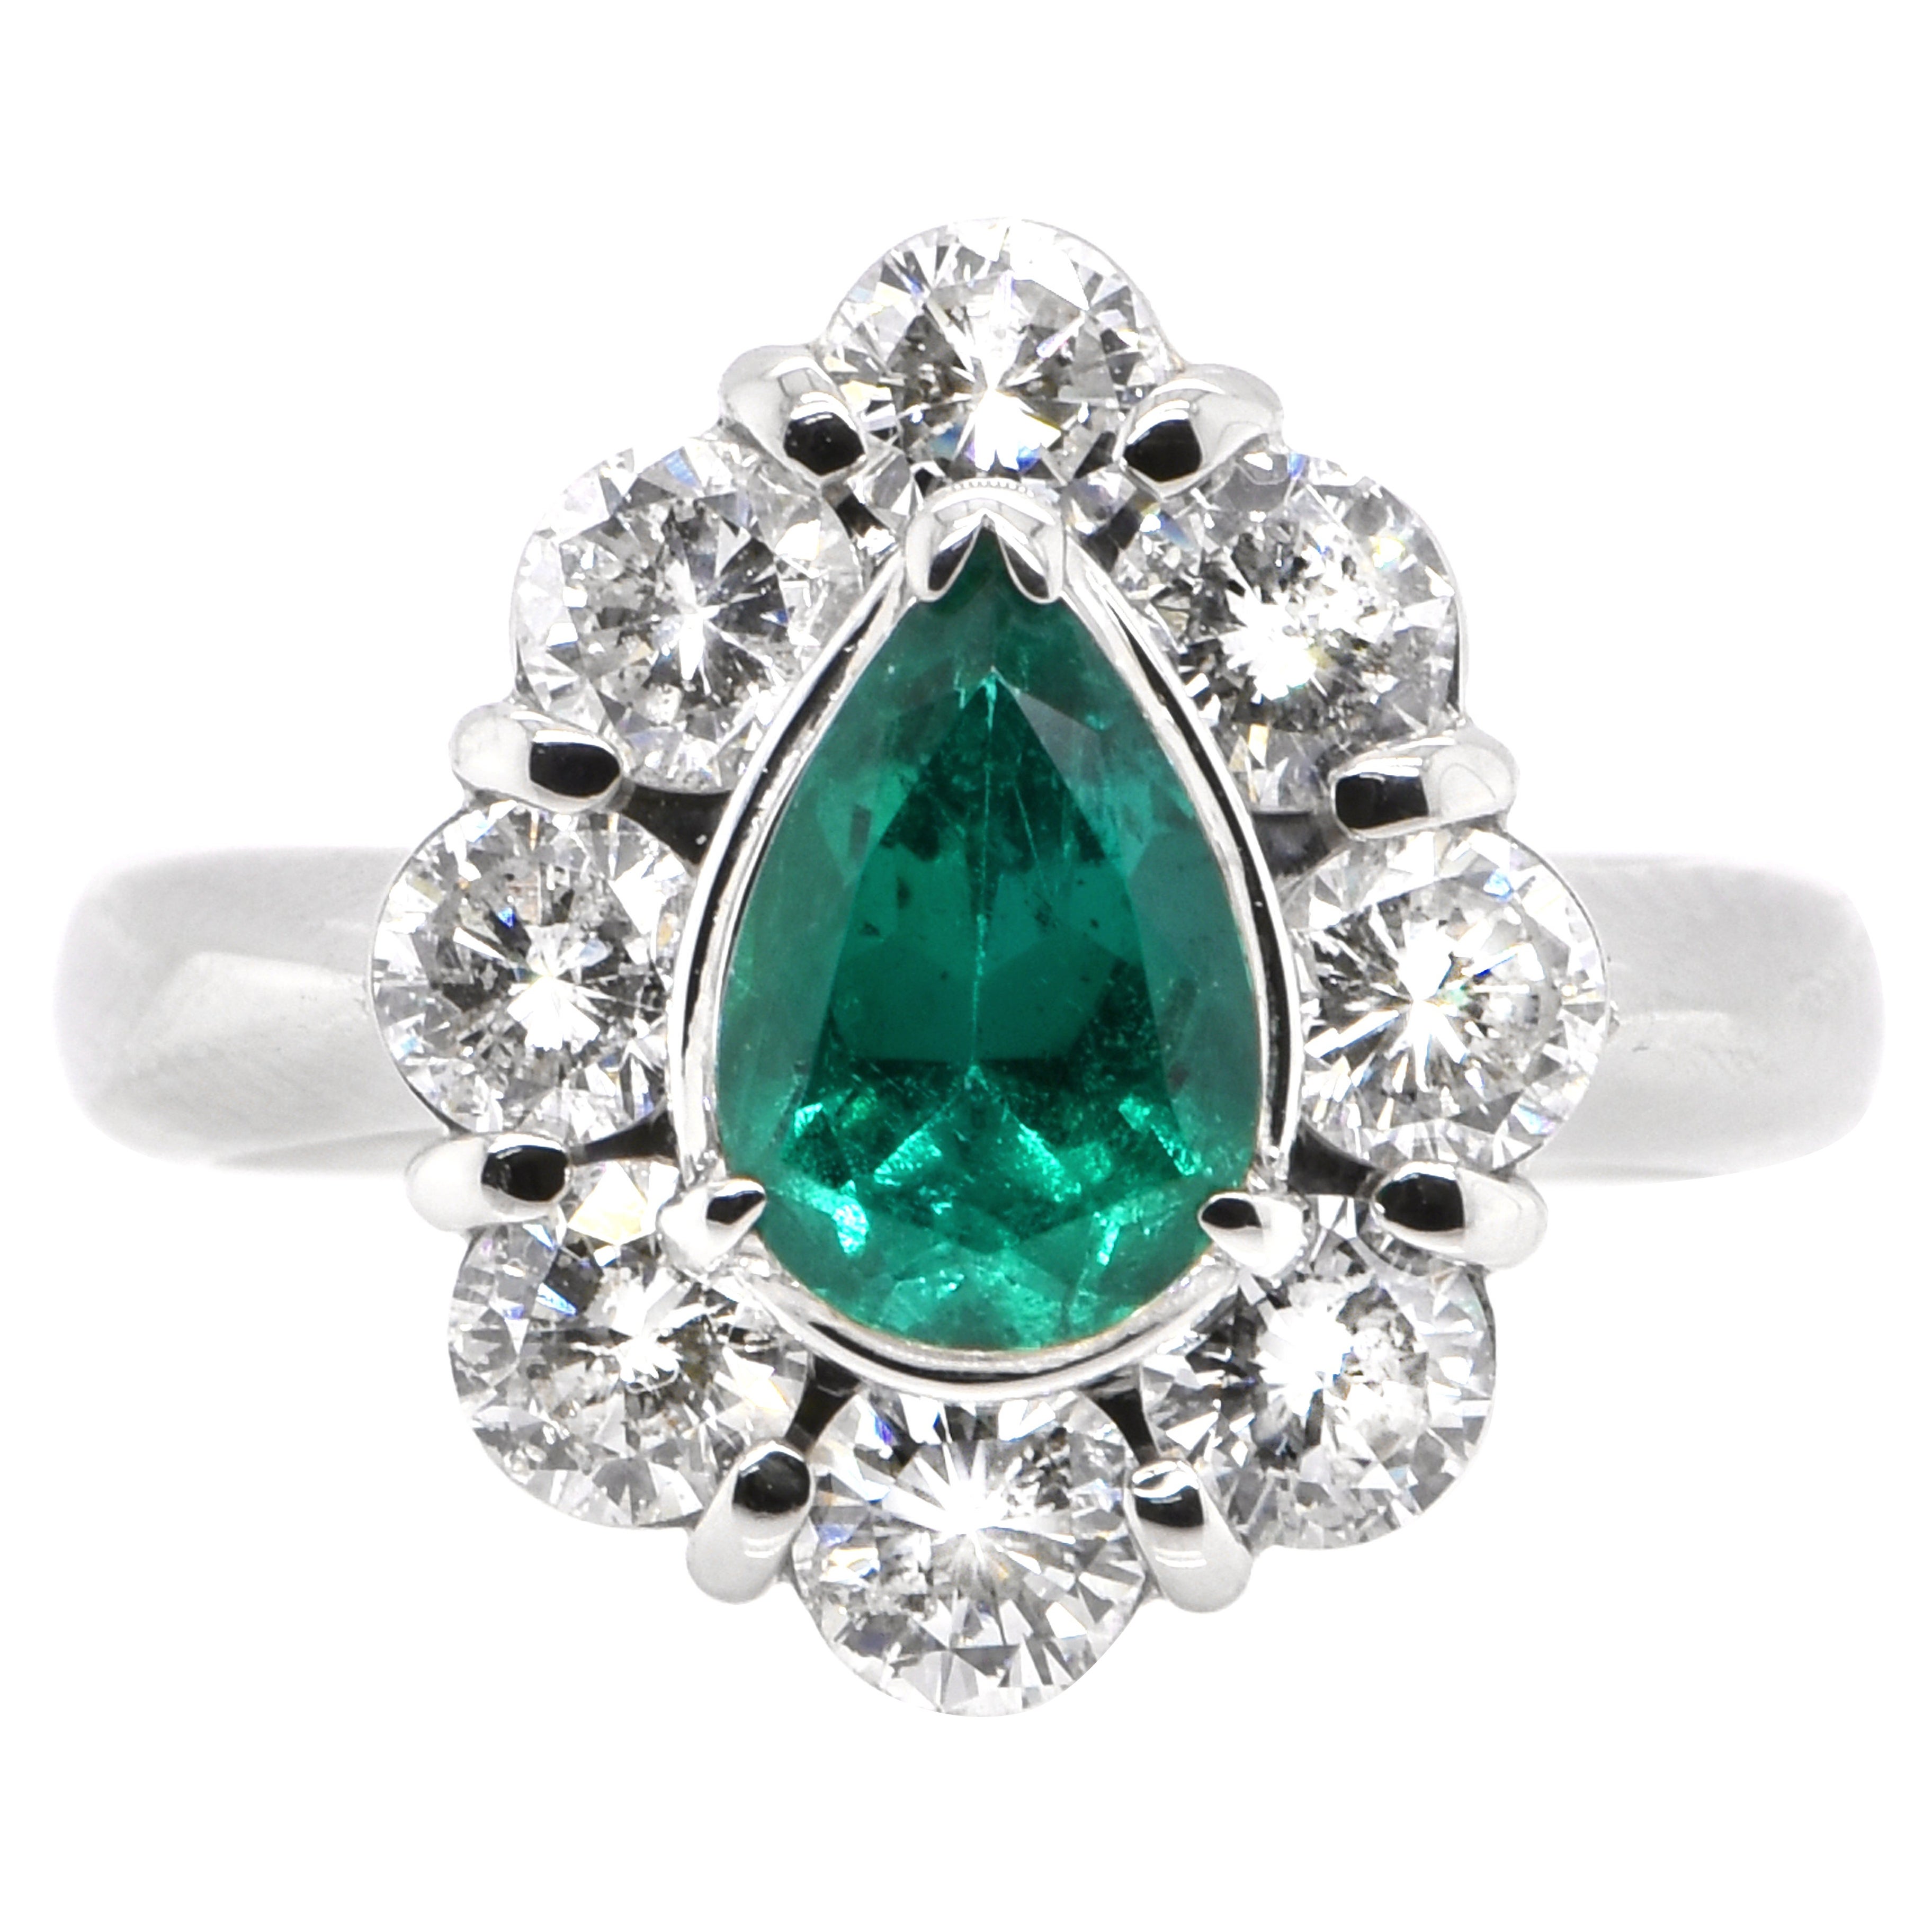 0.98 Carat Natural Pear-Shaped Emerald and Diamond Ring Set in Platinum